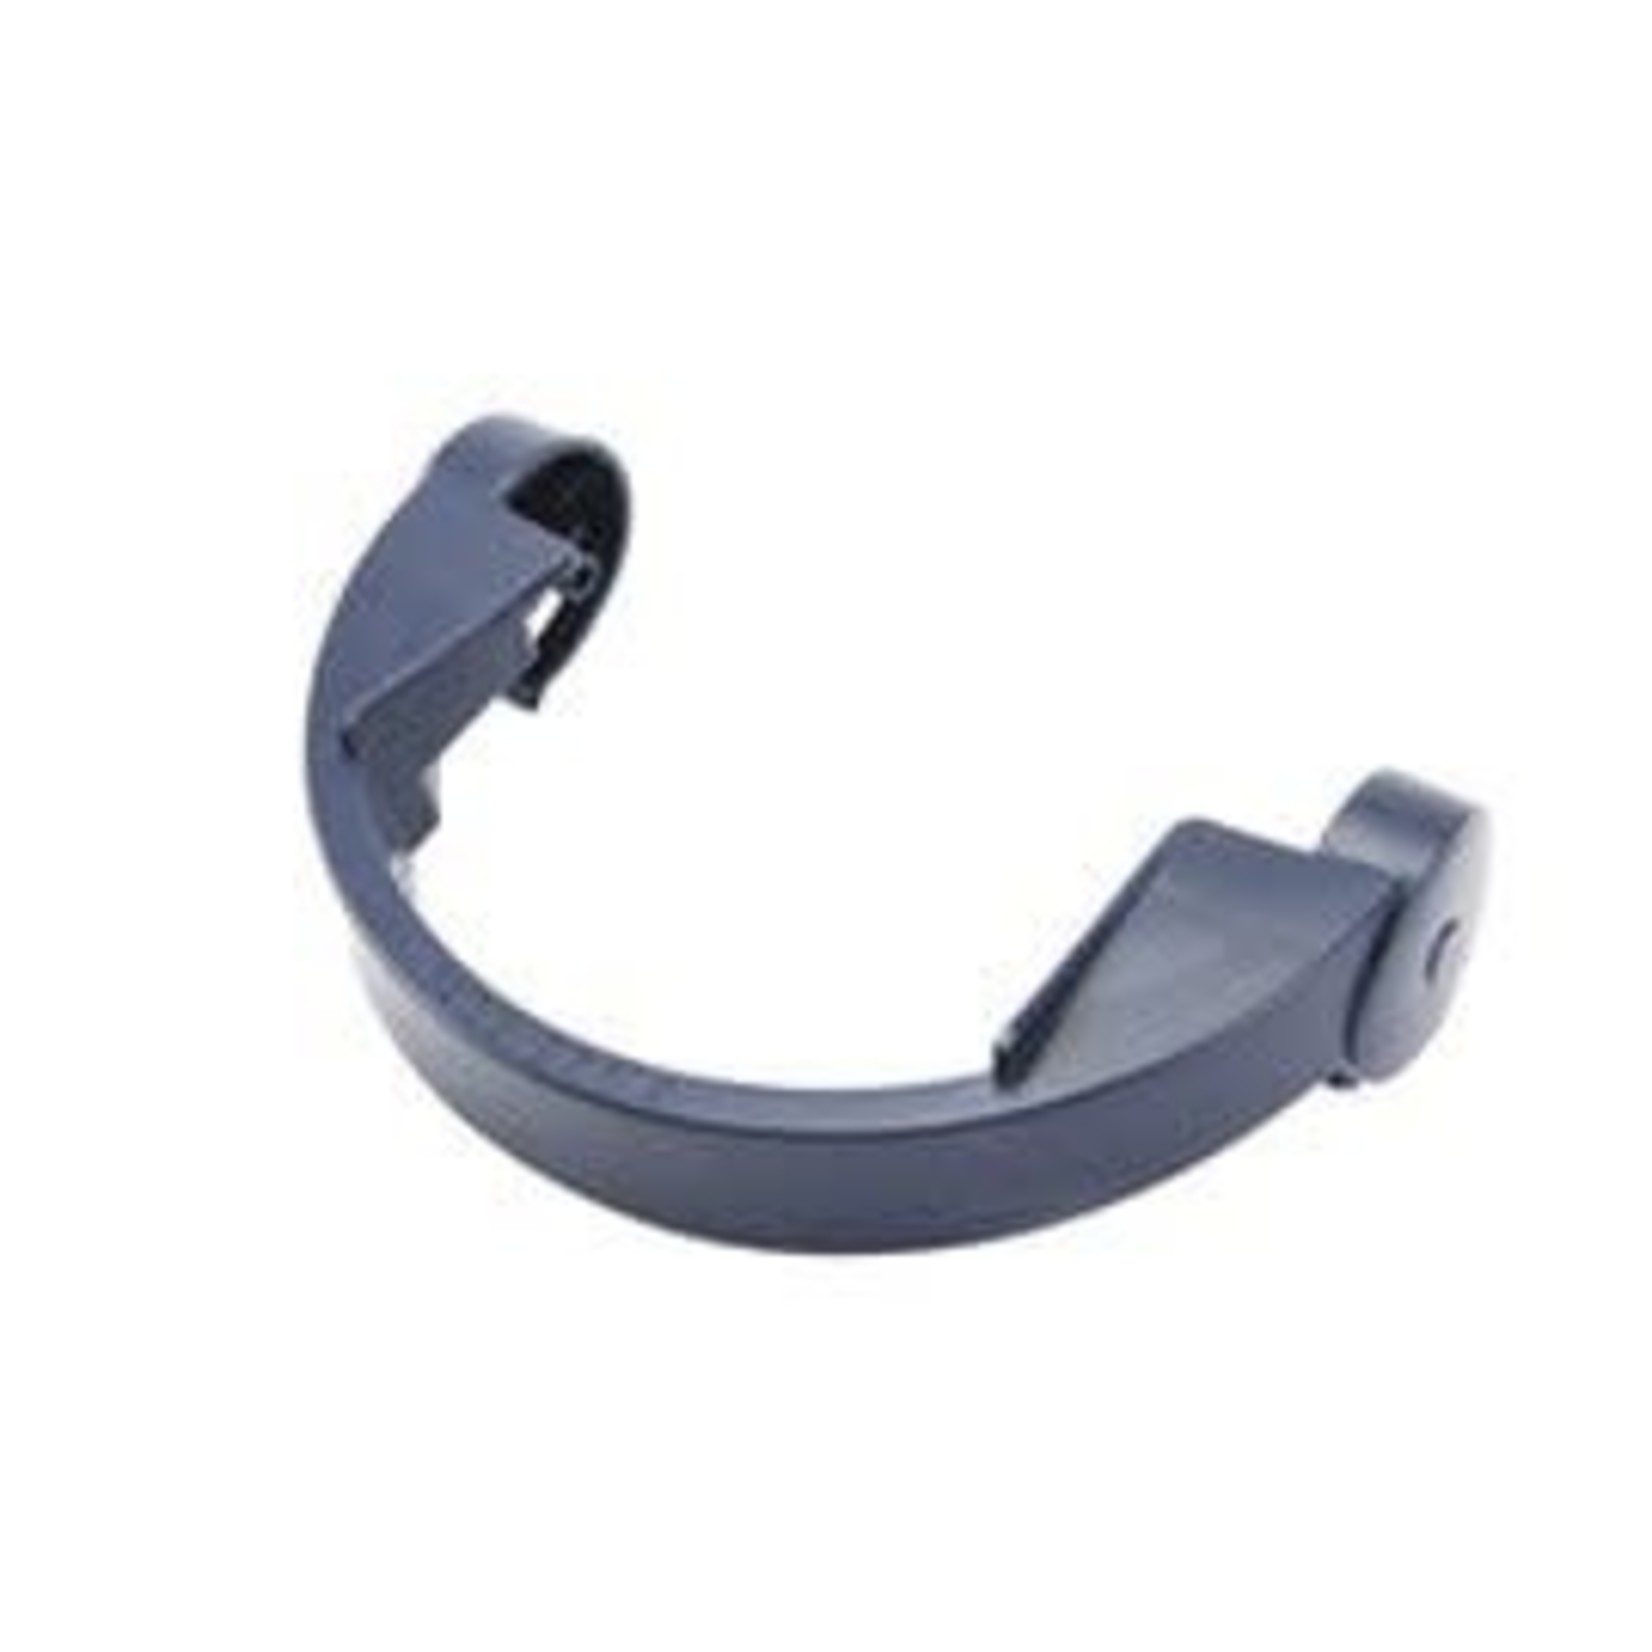 Hoover Hoover Tank Handle for F7400 Series